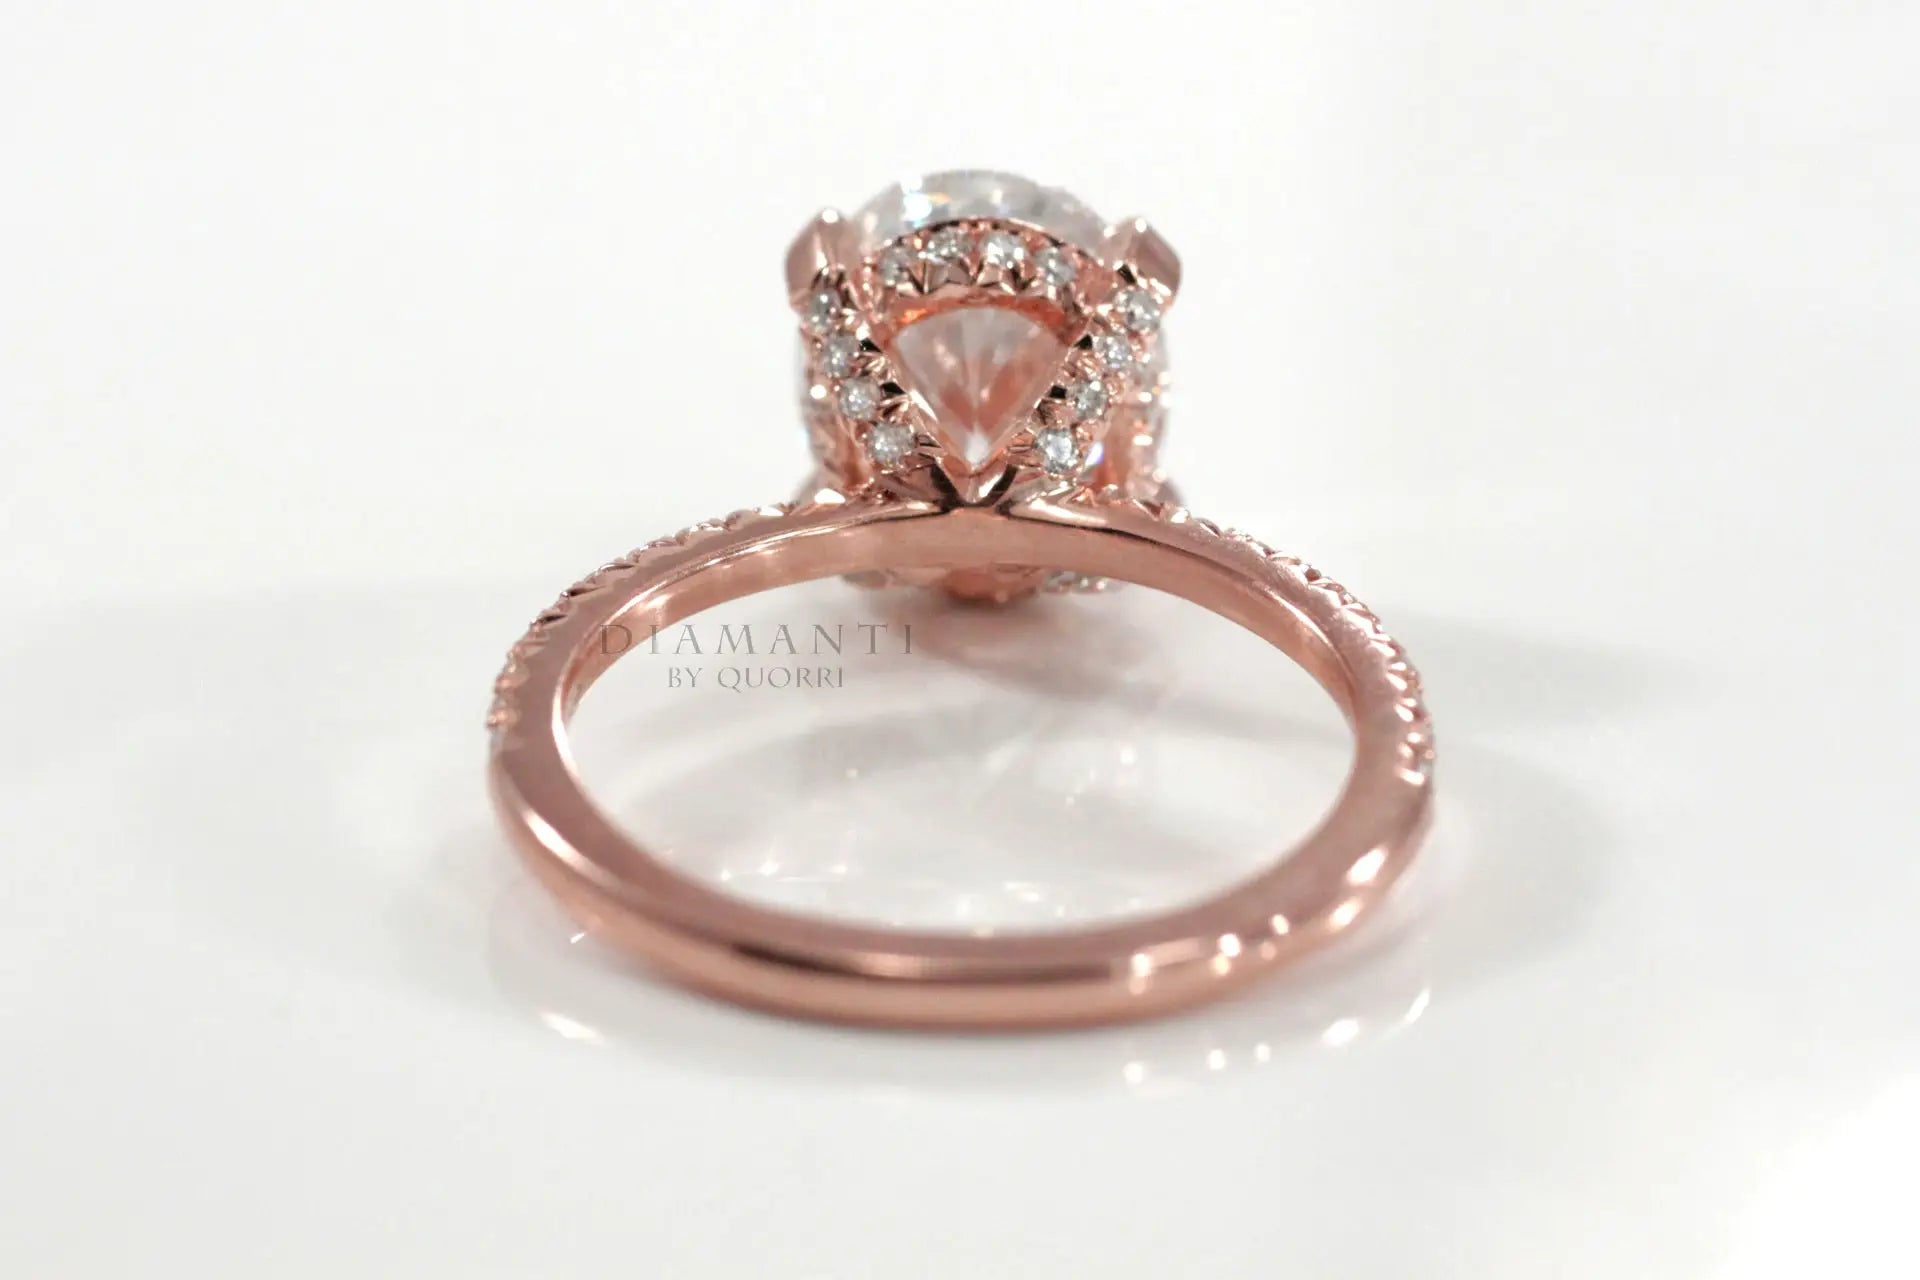 14k rose gold c4 law prong accented 2 carat oval lab made diamond engagement ring Quorri